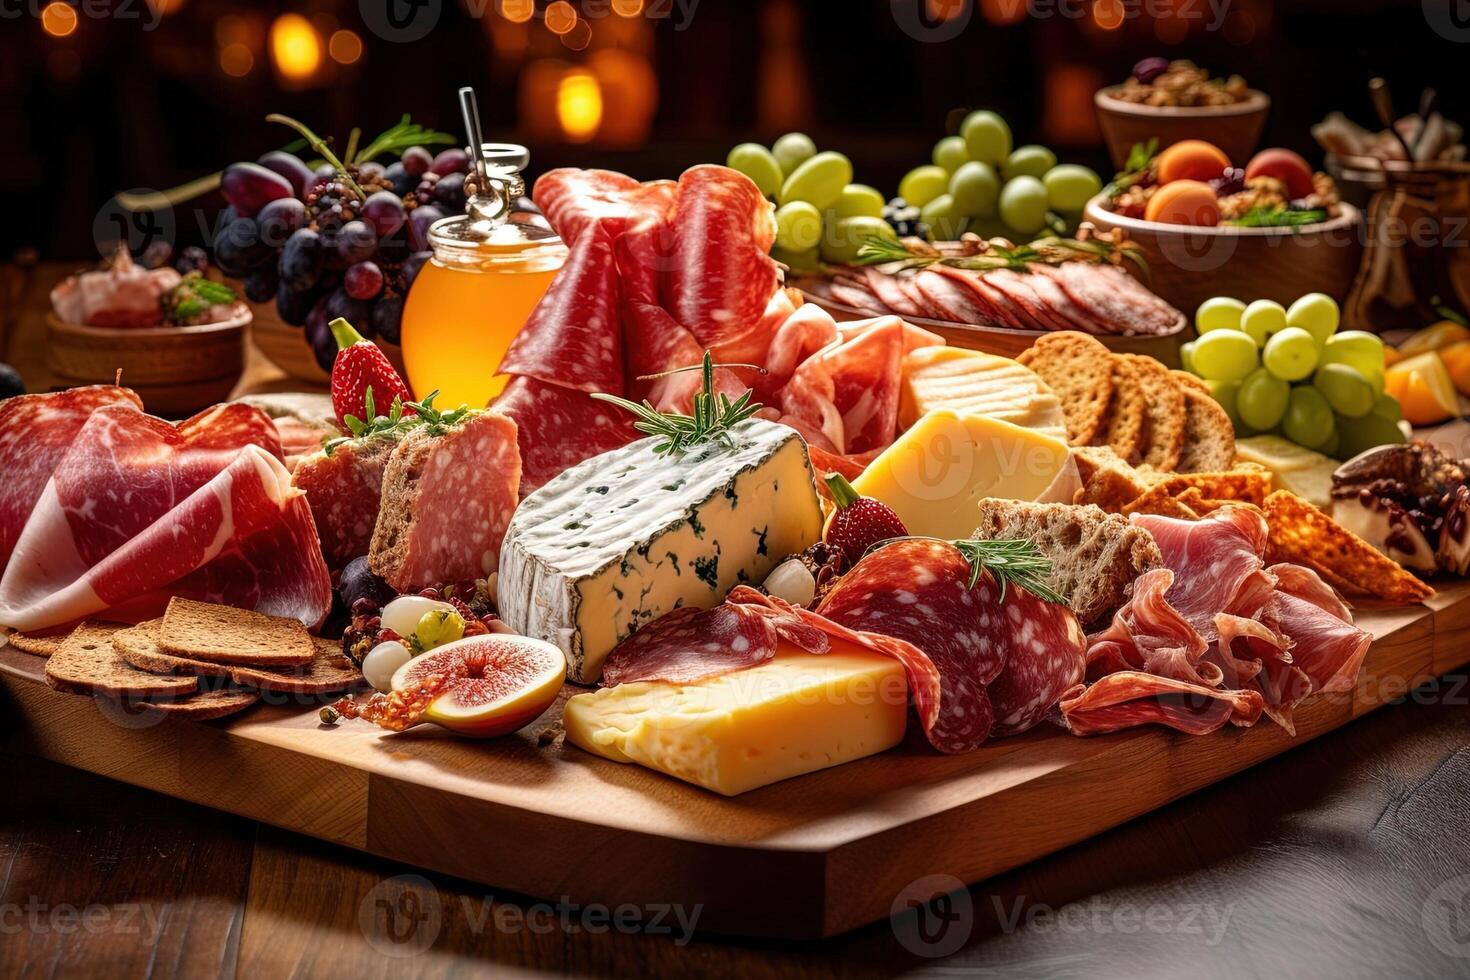 gourmet food Charcuterie board, showcasing a variety of delicious artisanal cheeses, cured meats, fresh fruits, and bread illustration photo